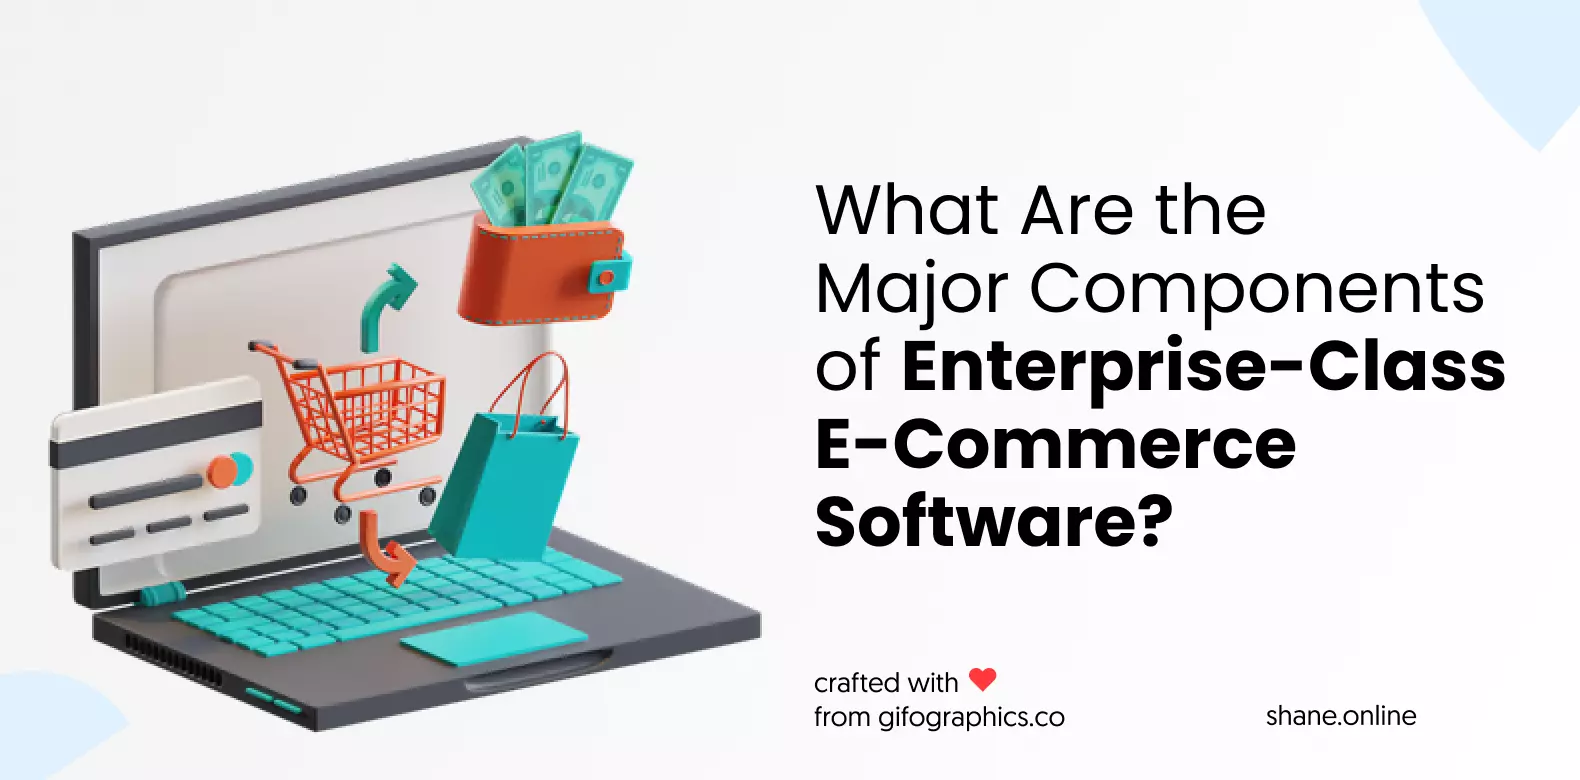 What Are the Major Components of Enterprise-Class E-Commerce Software